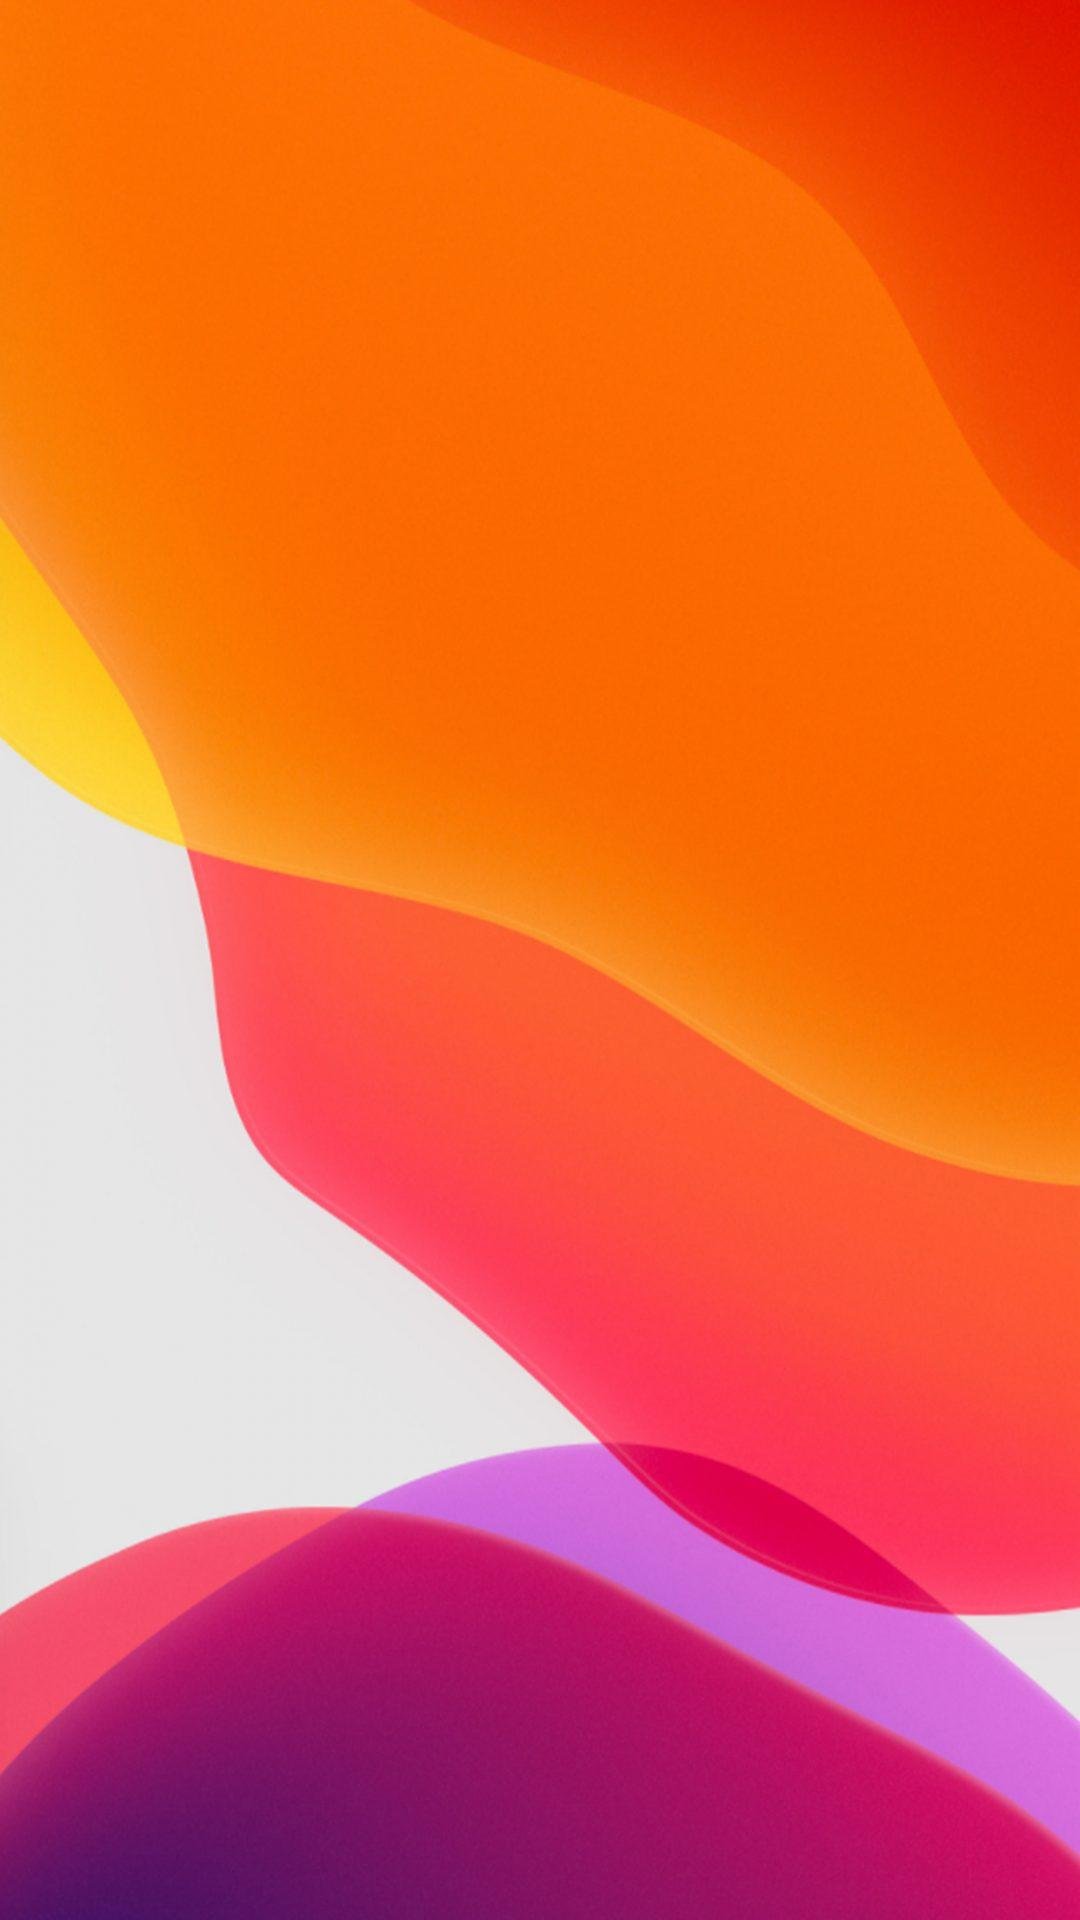 Ios 13 home screen Wallpapers Download | MobCup